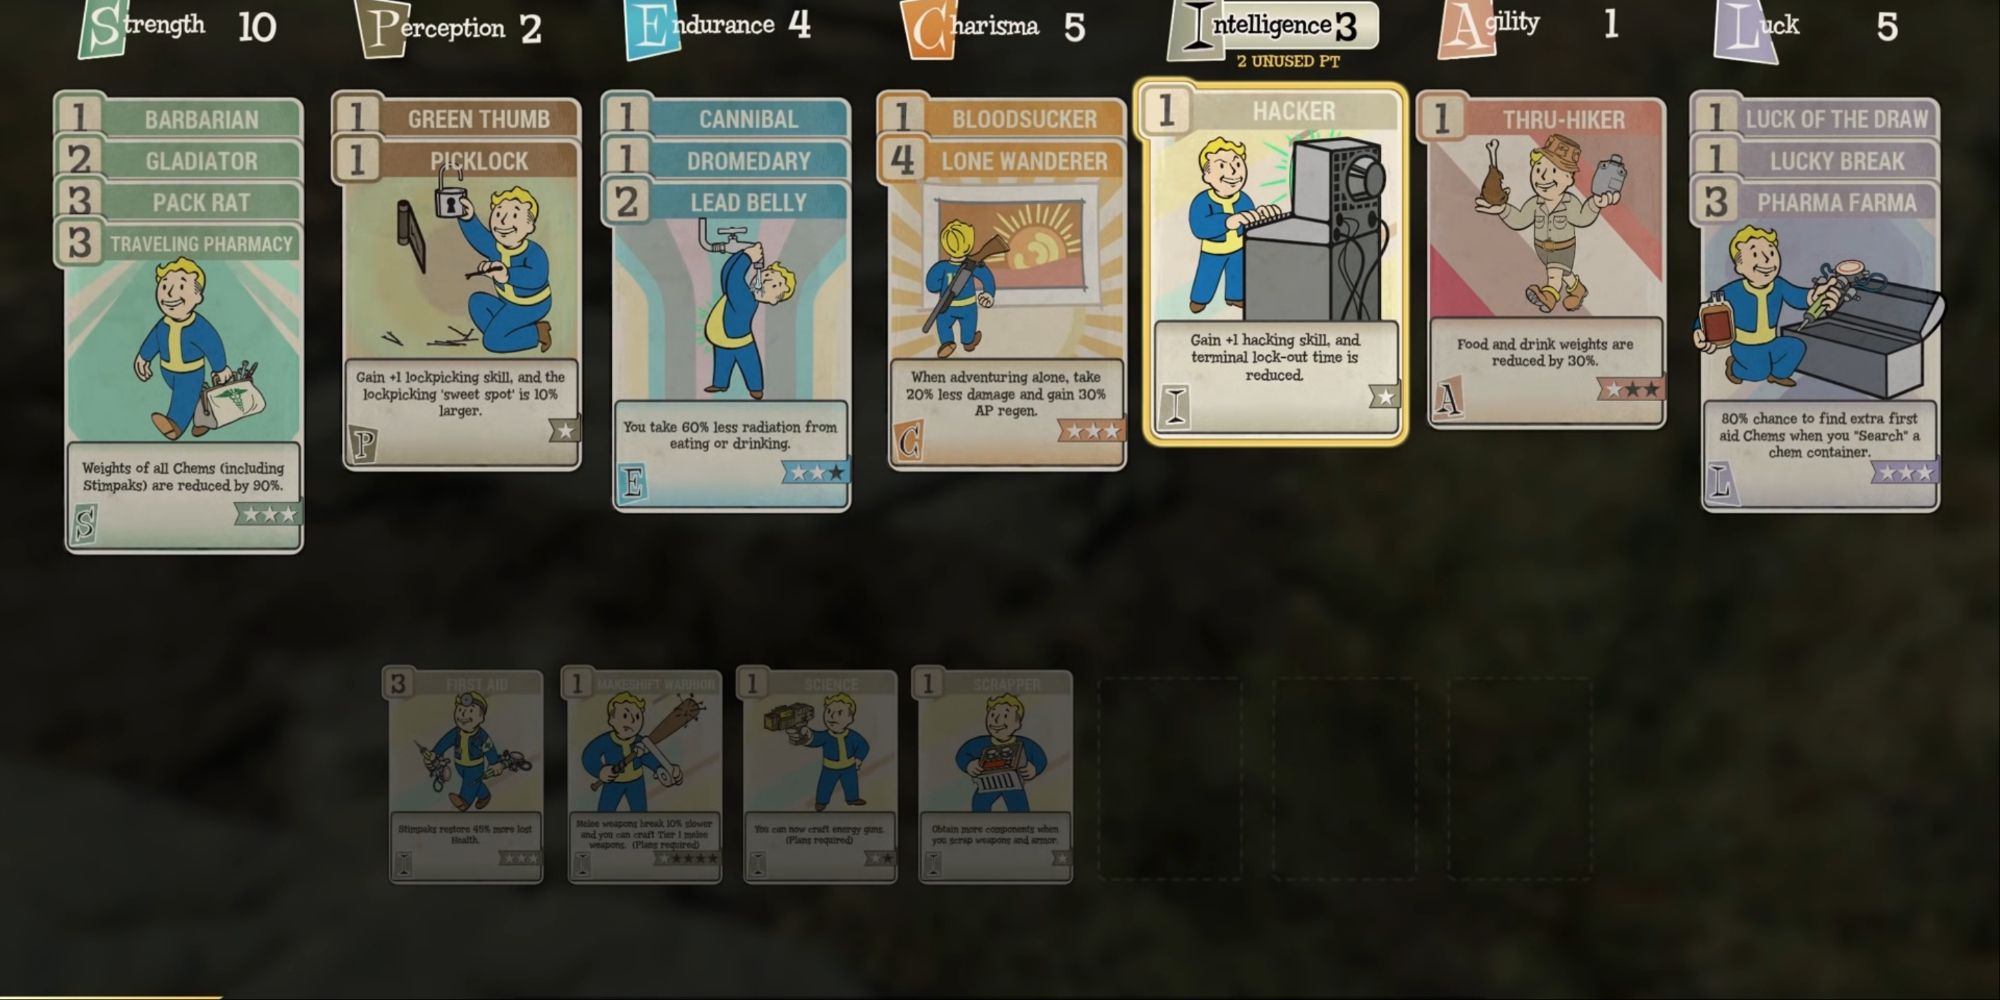 The stats and perks screen in Fallout 76